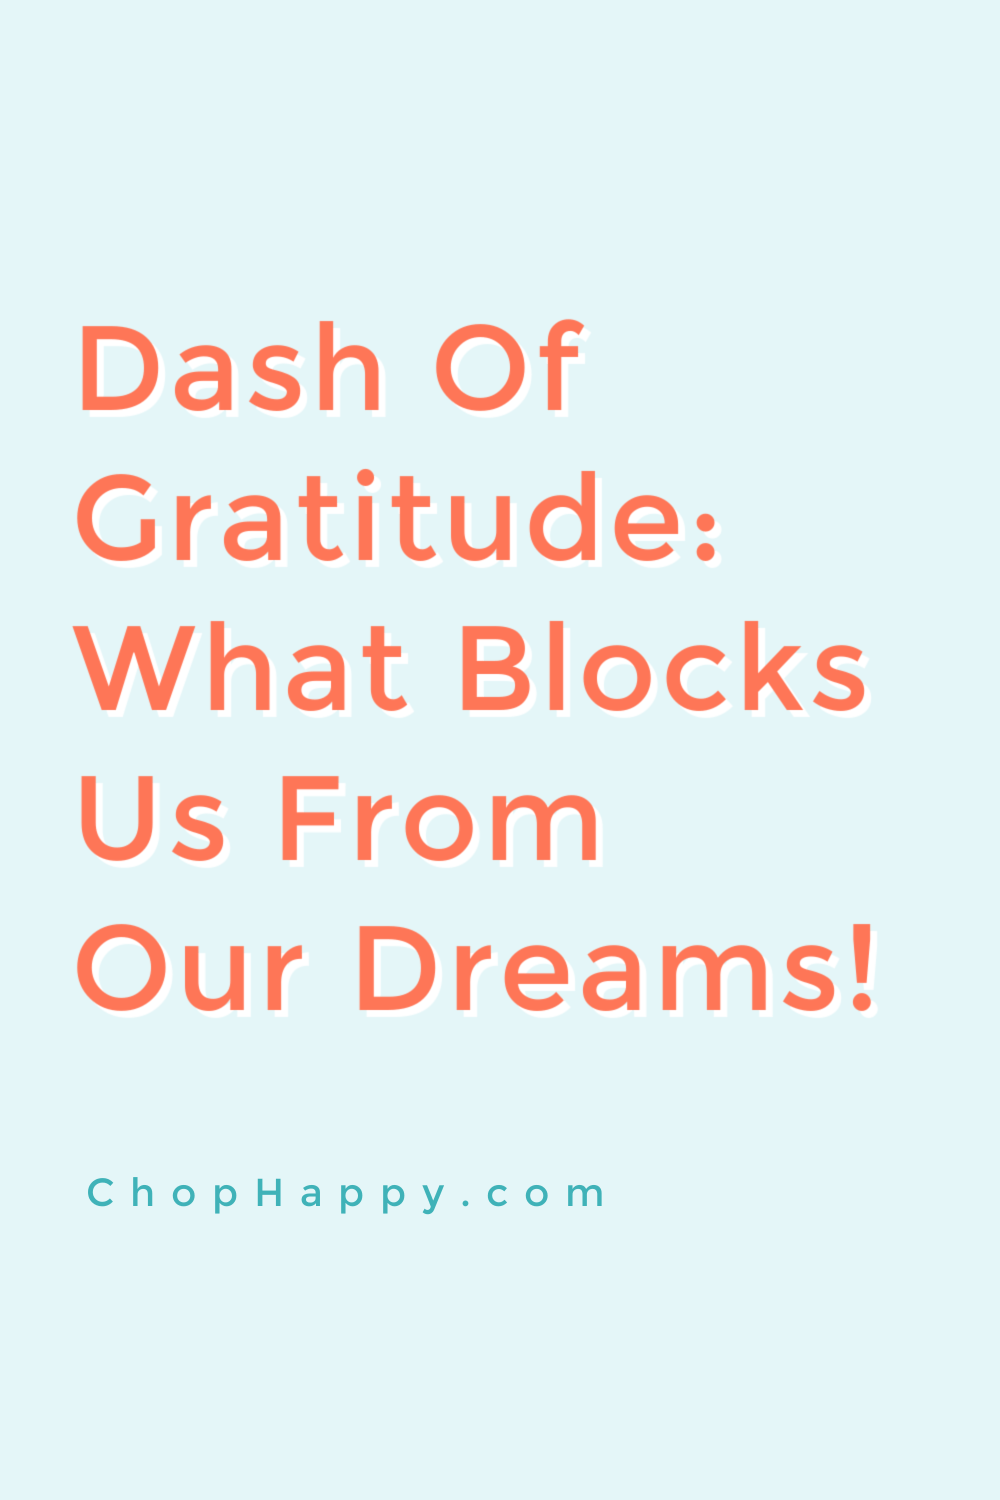 Dash of Gratitude: What Blocks Us From Our Dreams. The law of attraction helps you focus on what you want. www.ChopHappy.com #Gratitude #LawofAttraction